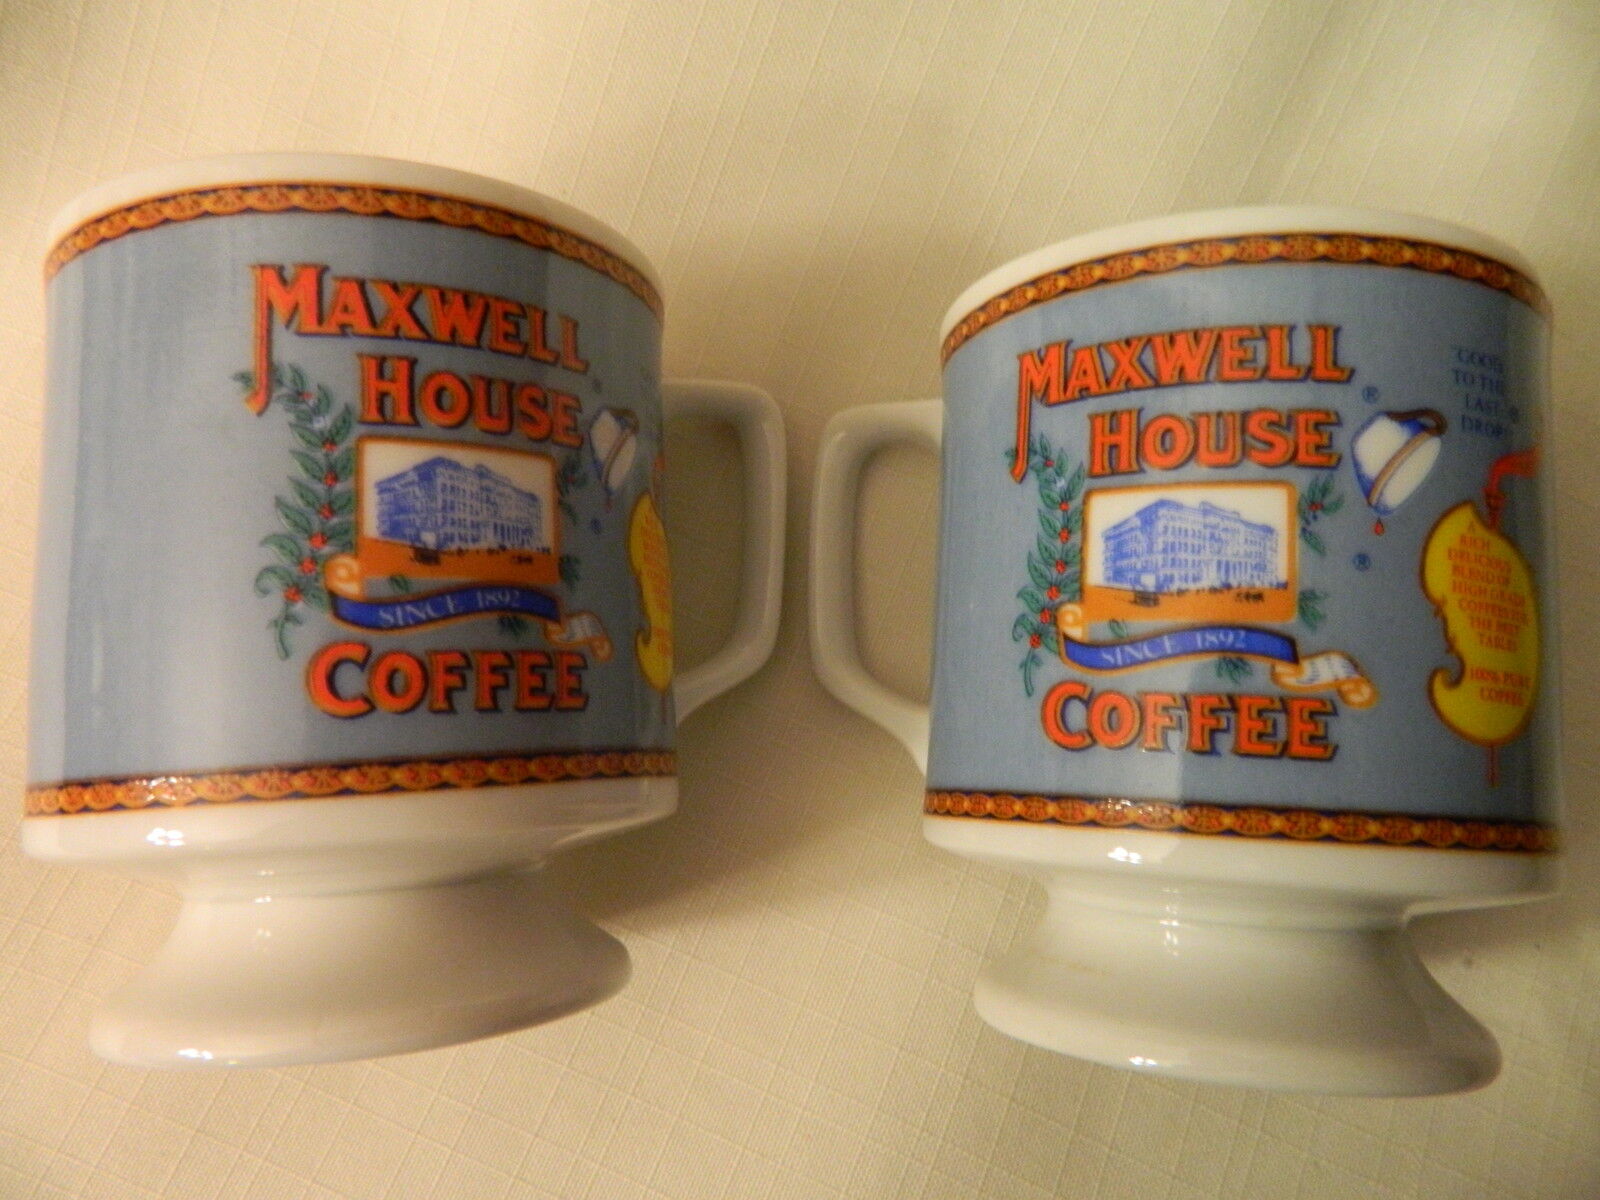 TWO VINTAGE MAXWELL HOUSE COFFEE MUGS - GENERA L FODS, CORP.